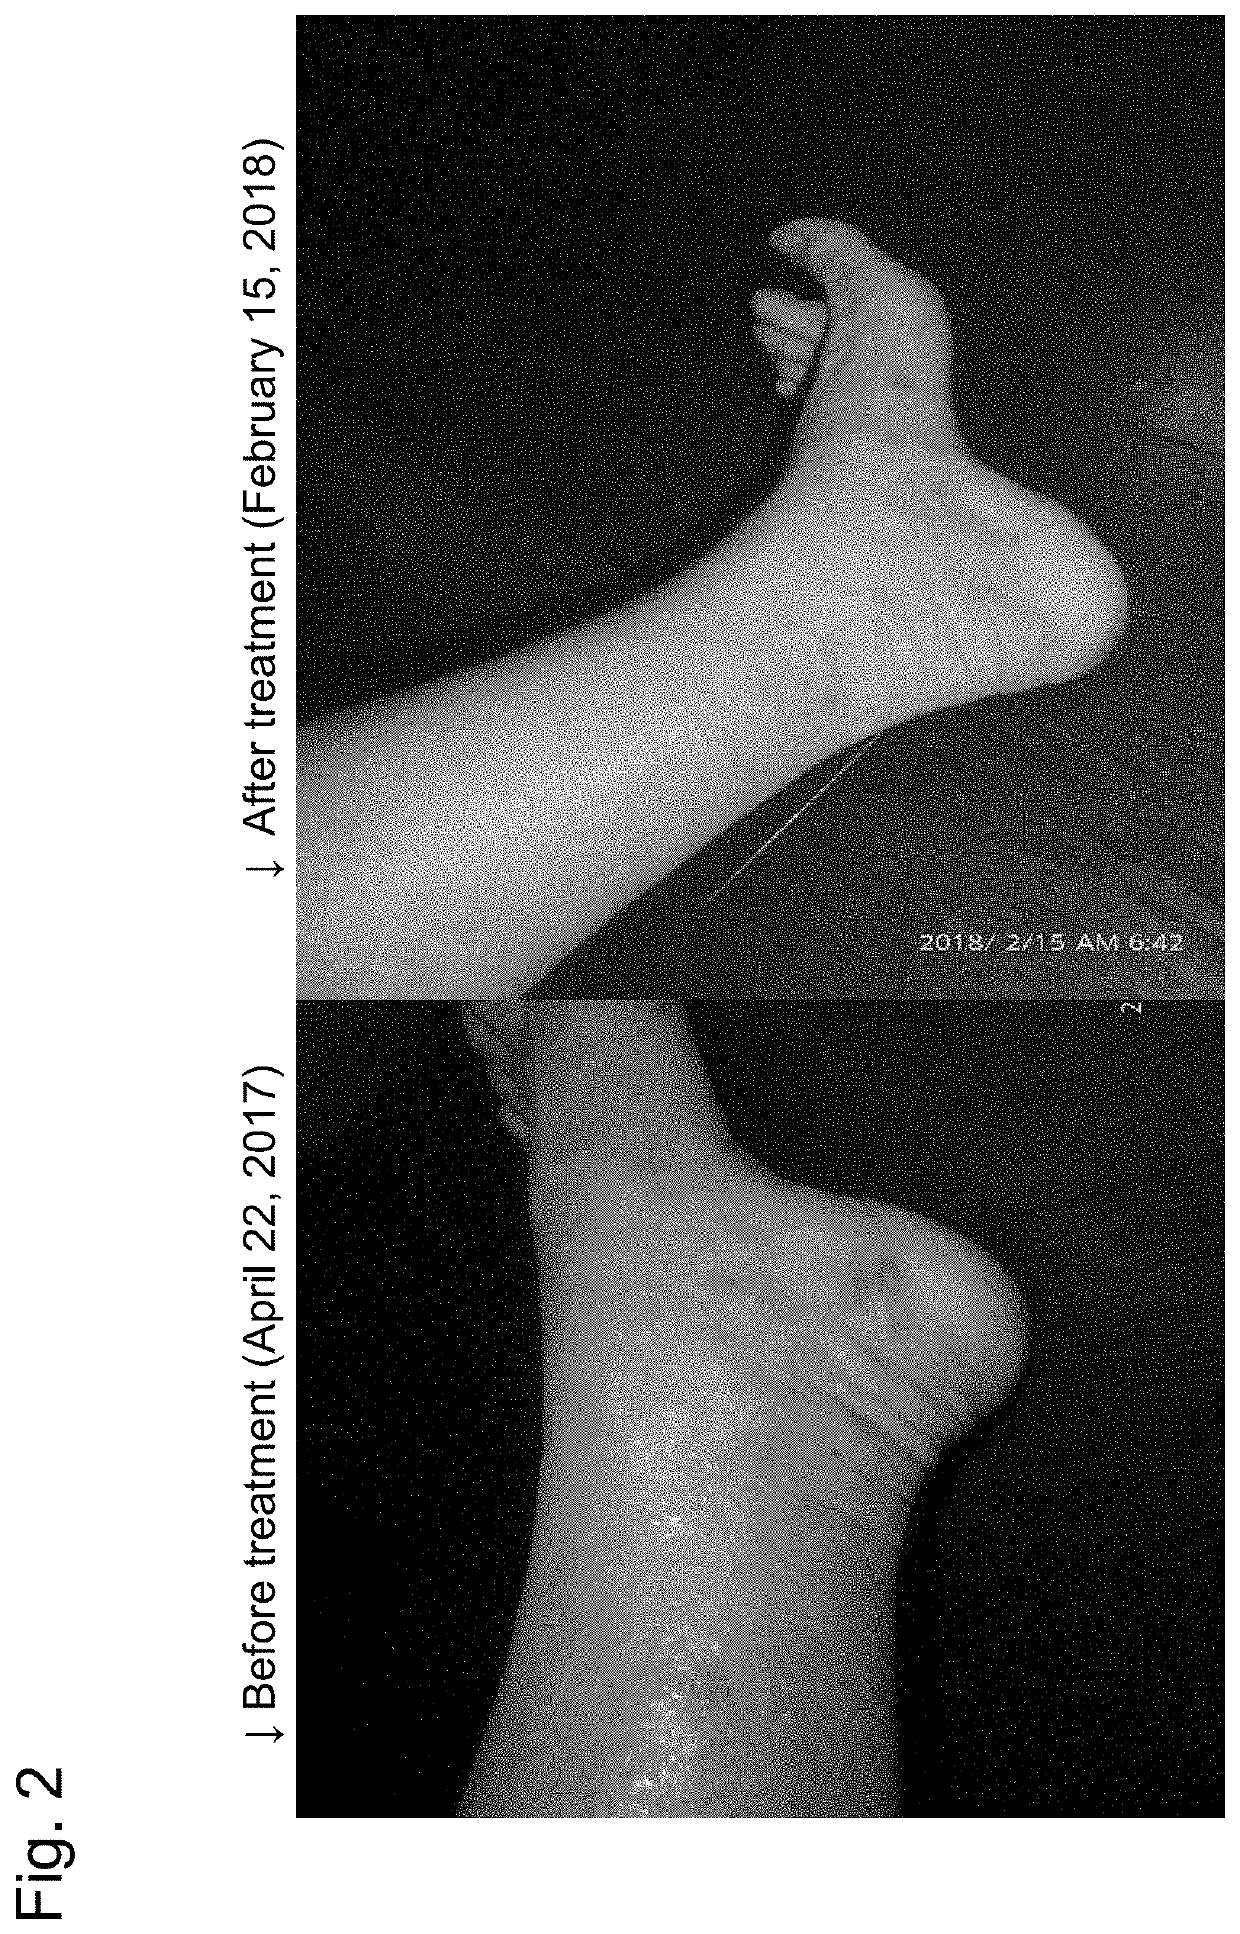 Method for reducing itching in atopic dermatitis